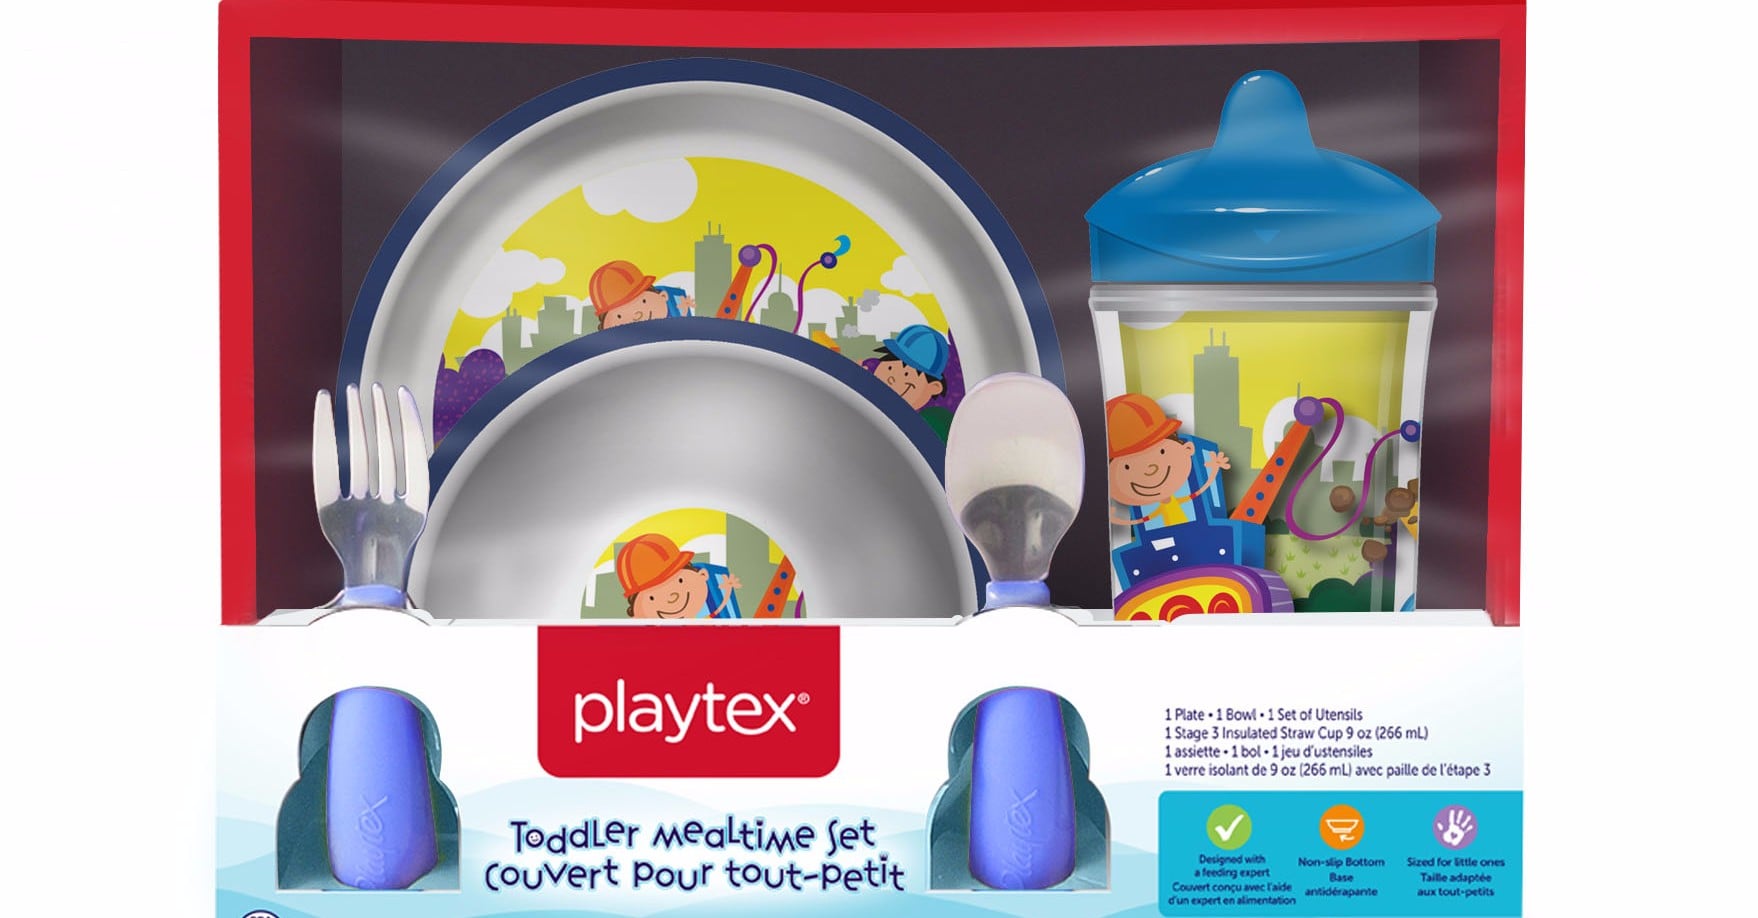 Playtex Kids Plastic Plates and Bowls Recall October 2017